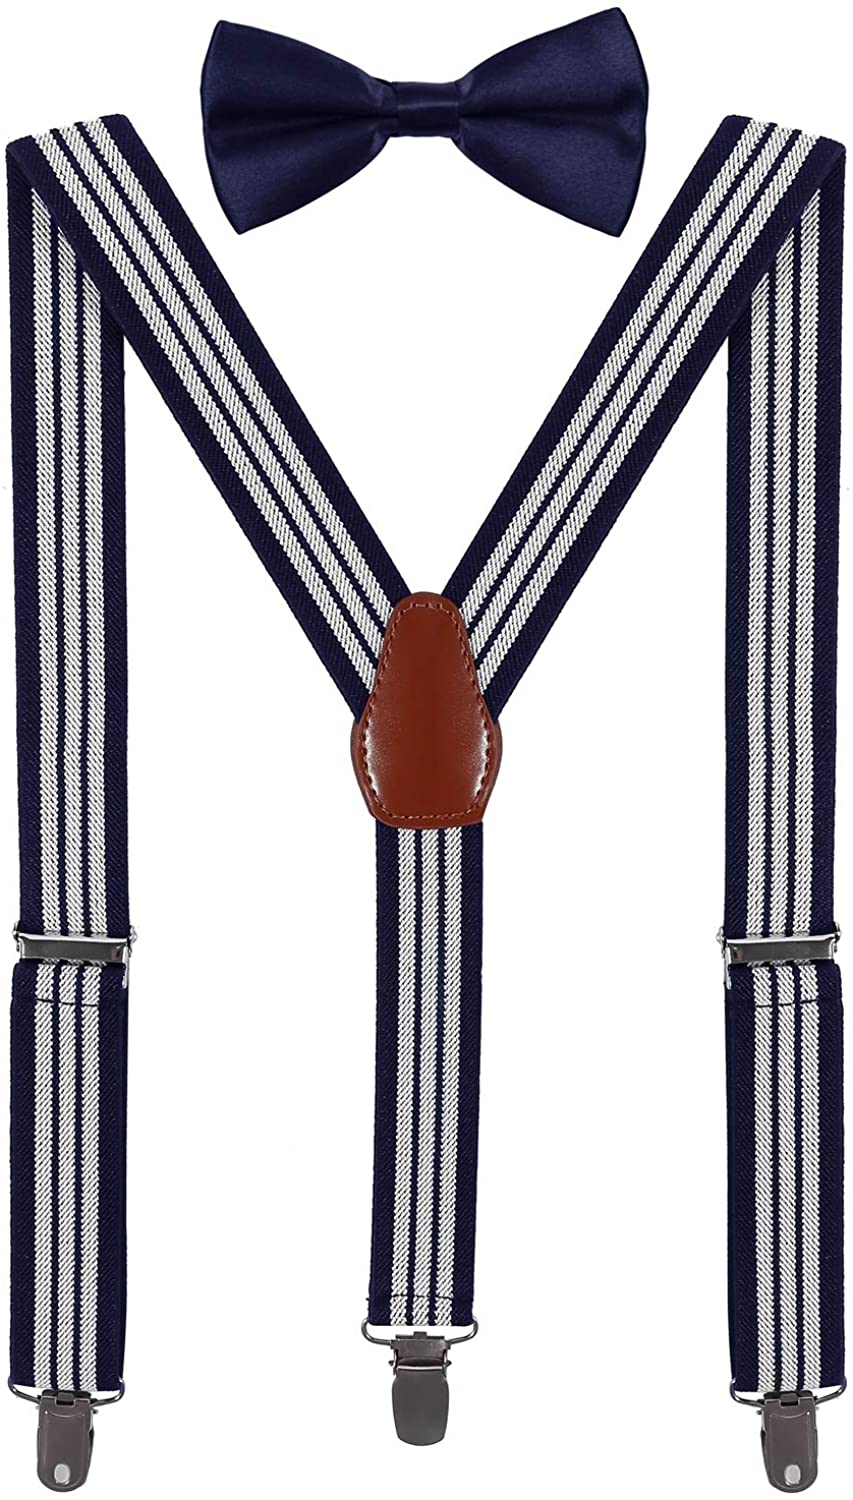 ORSKY Men Boys Suspenders and Bow Tie Set Adjustable with Black Clips 